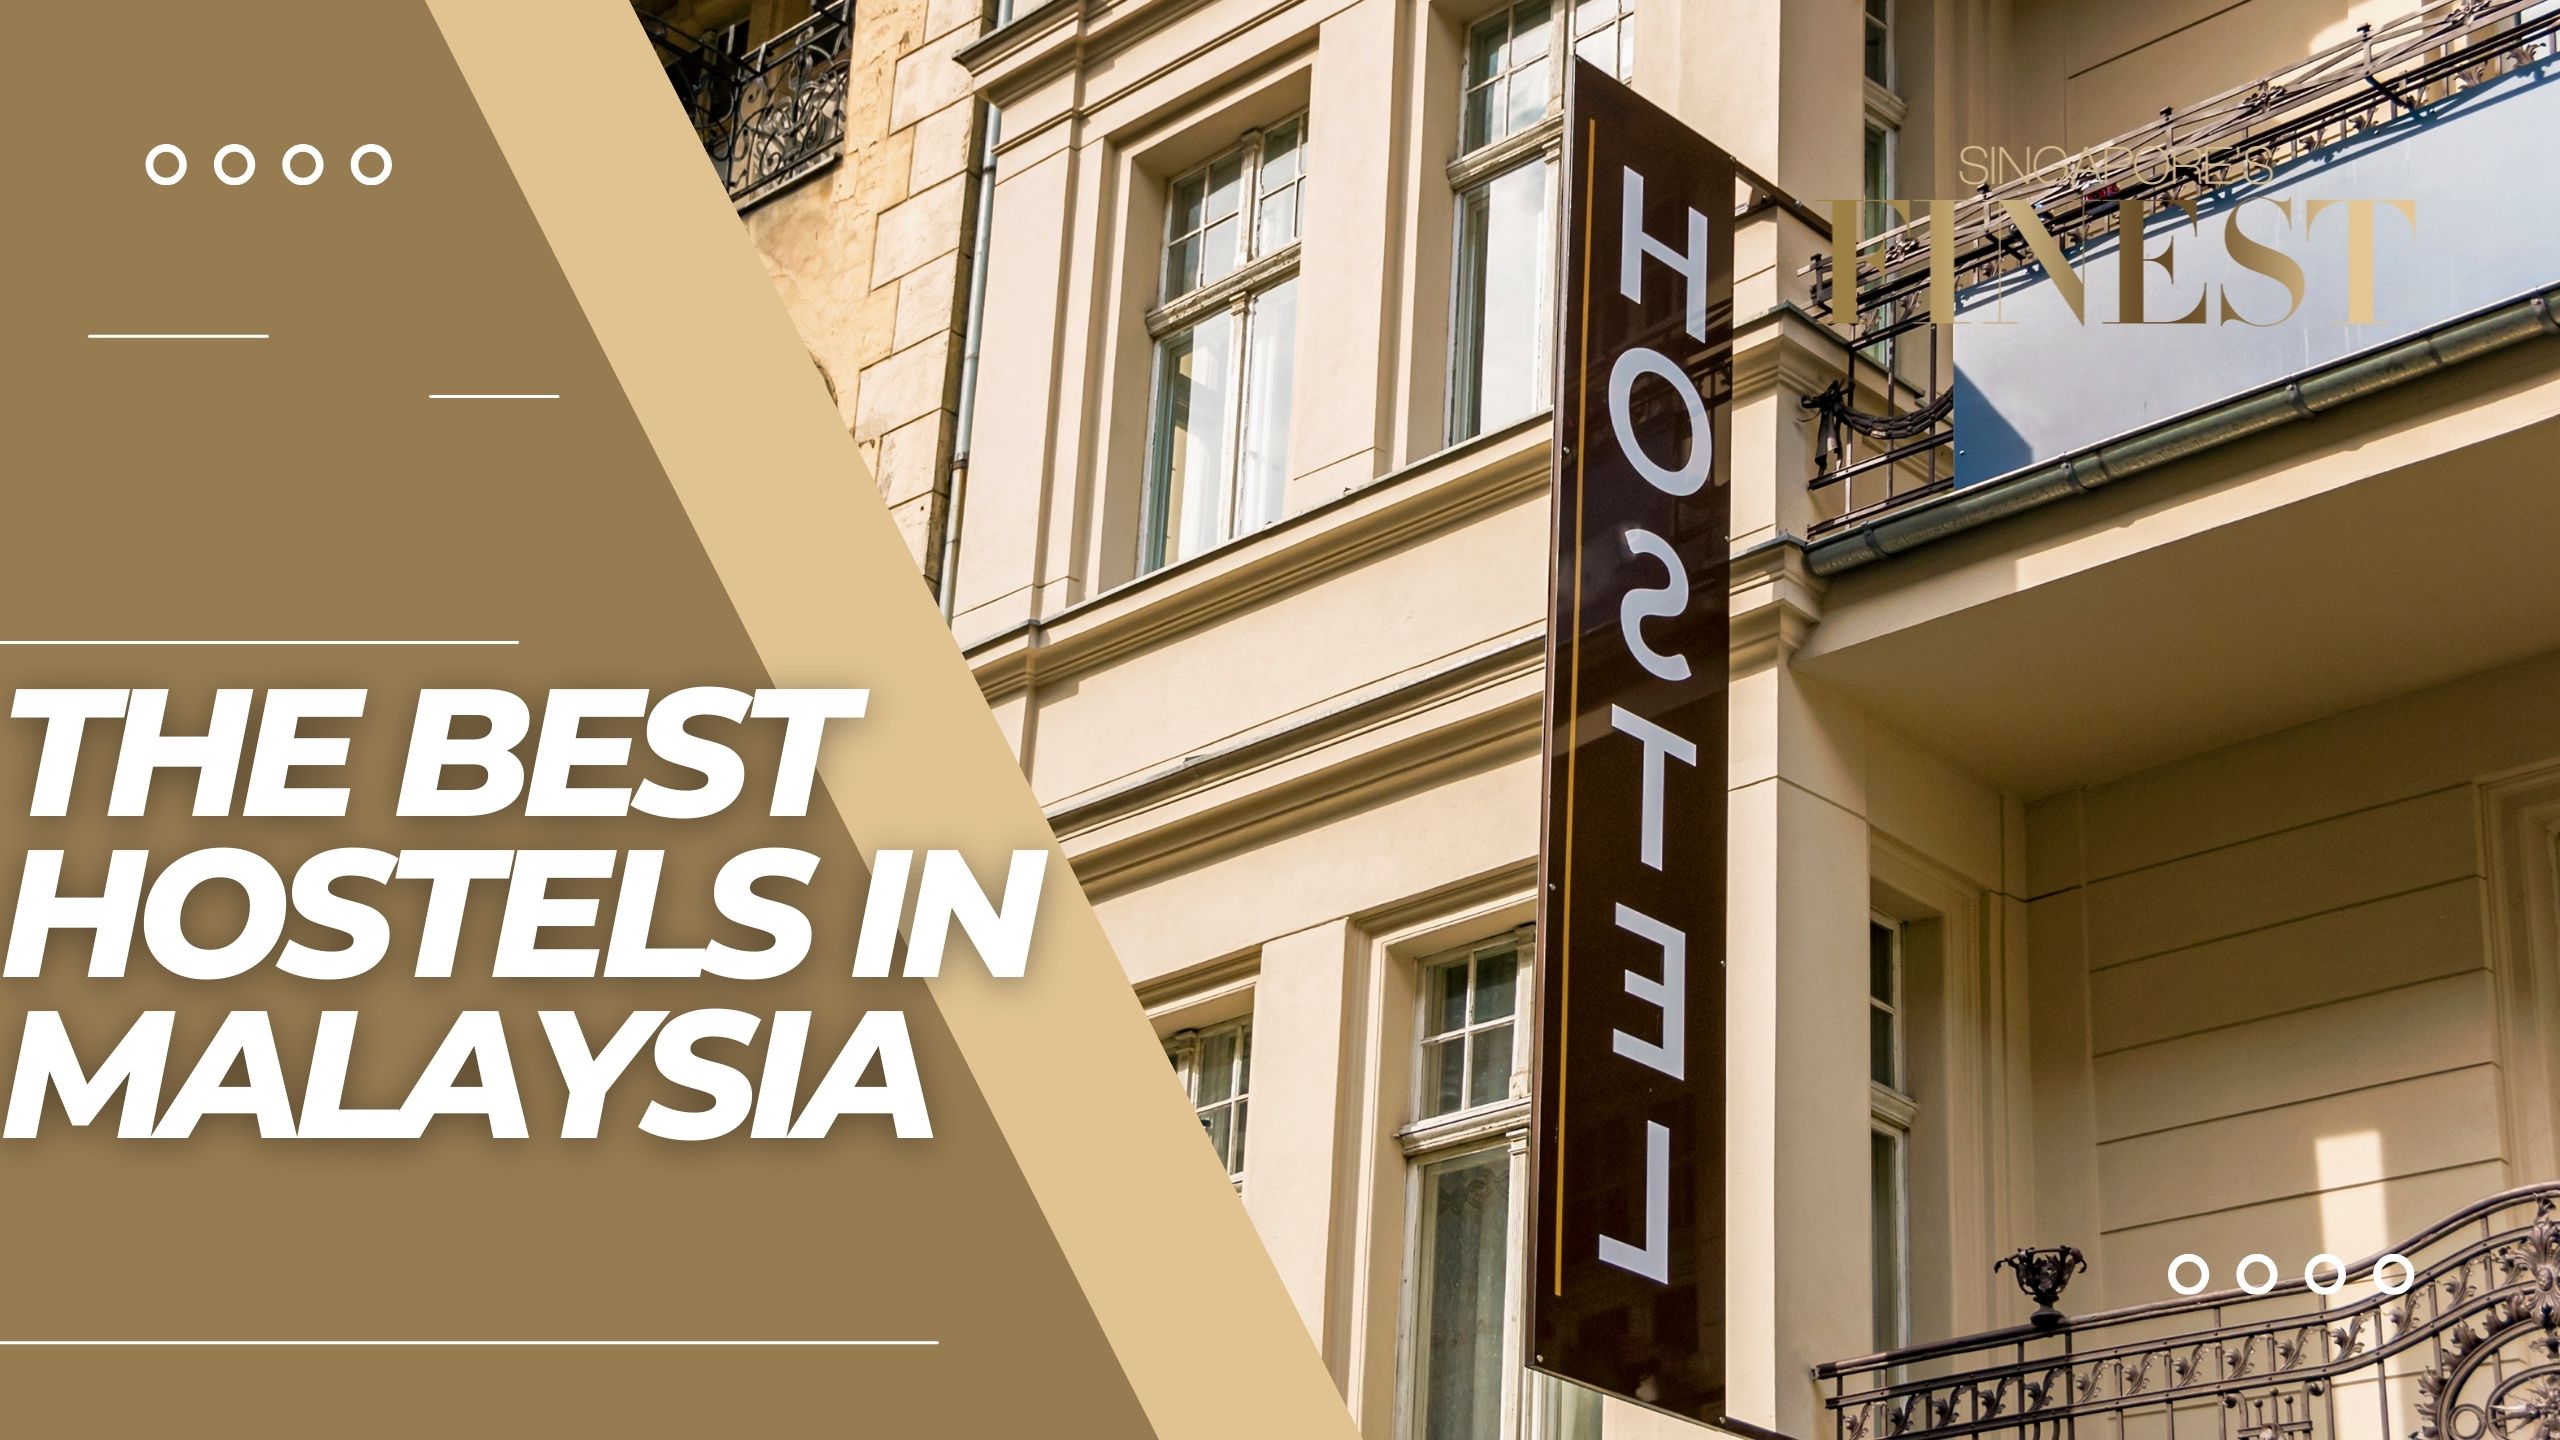 The Finest Hostels in Malaysia